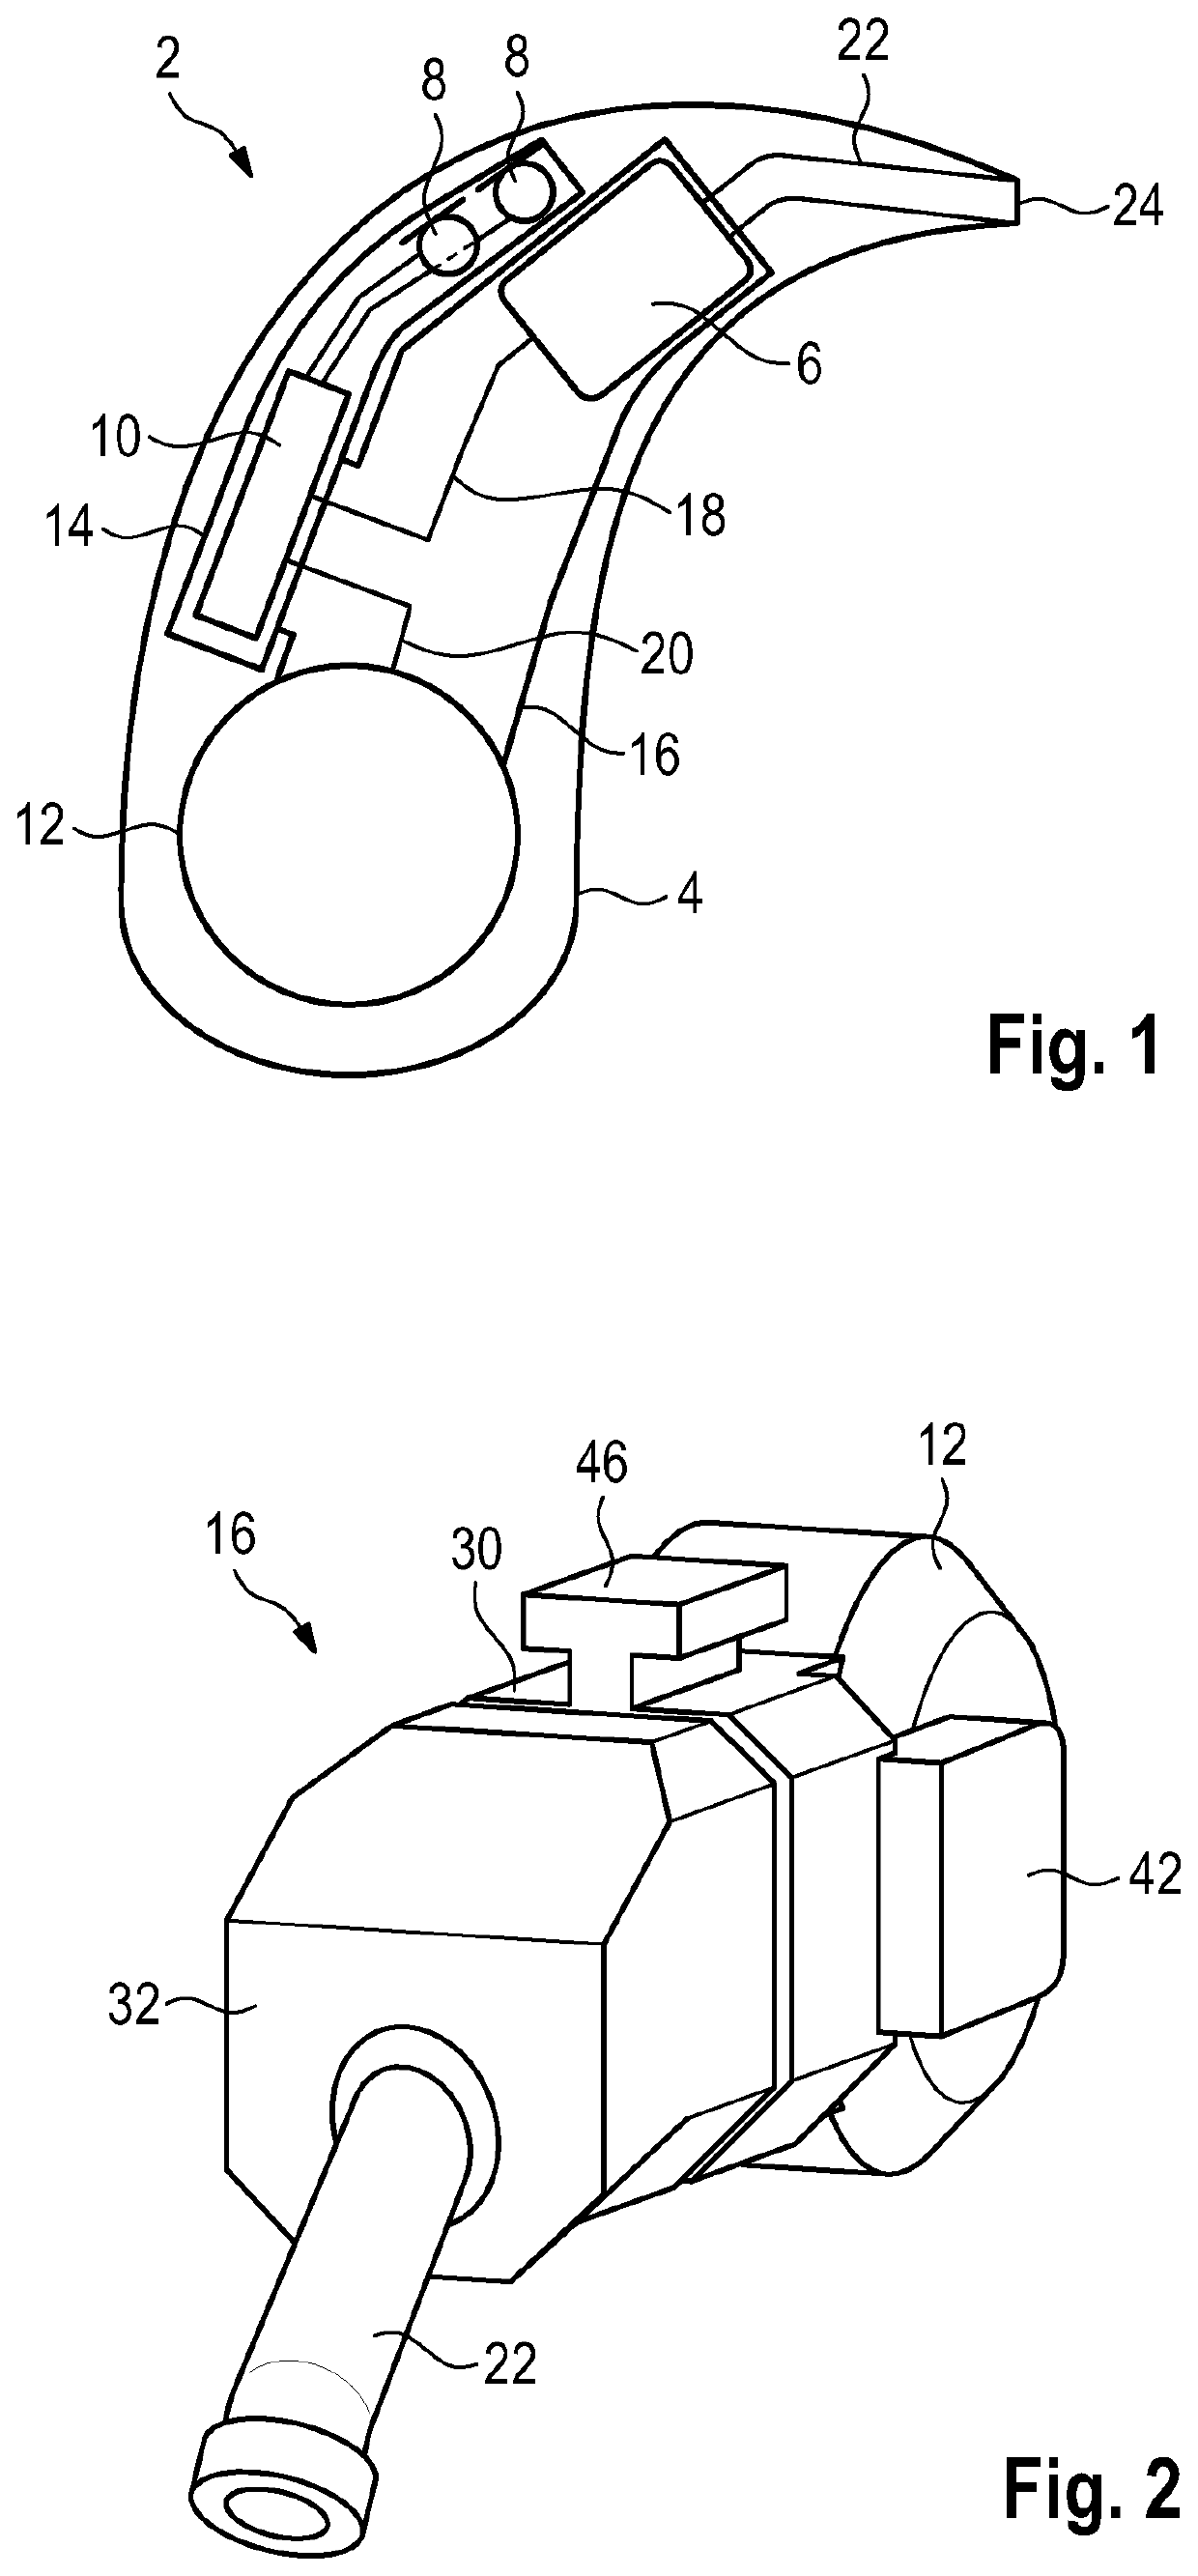 Hearing instrument having a coupling unit for the vibration-damped mounting of a receiver